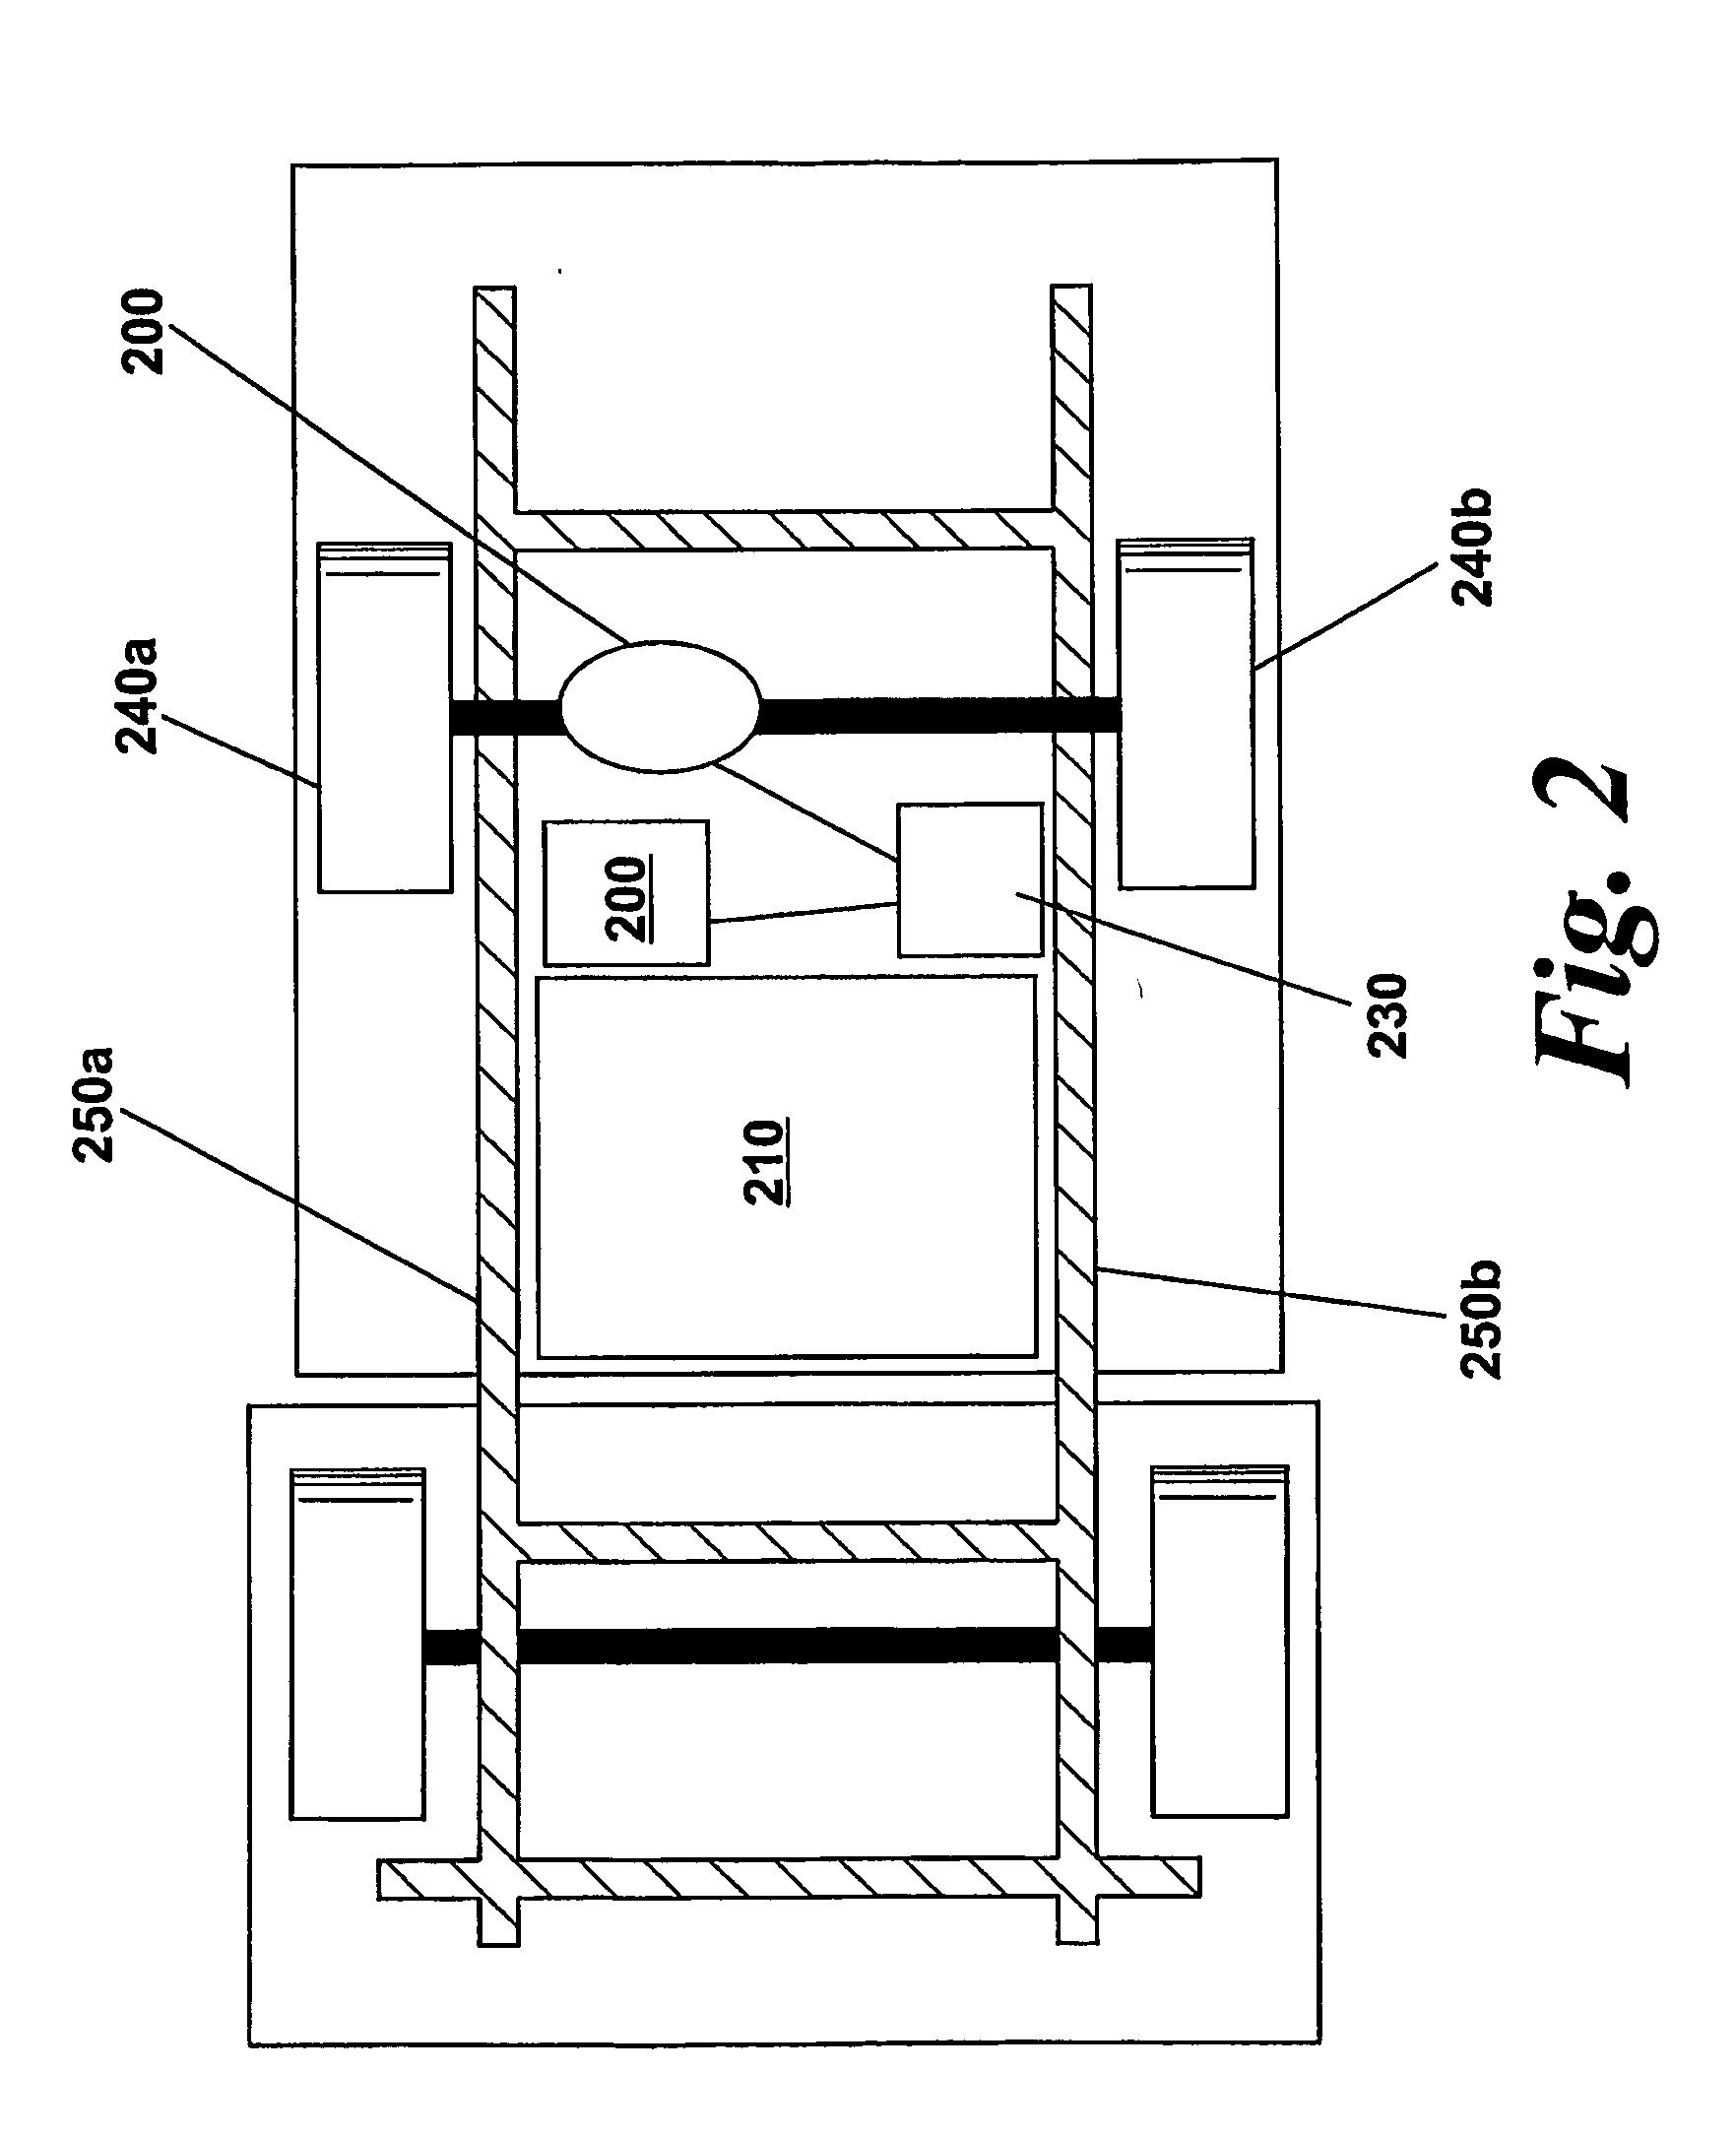 Control system for a battery powered vehicle